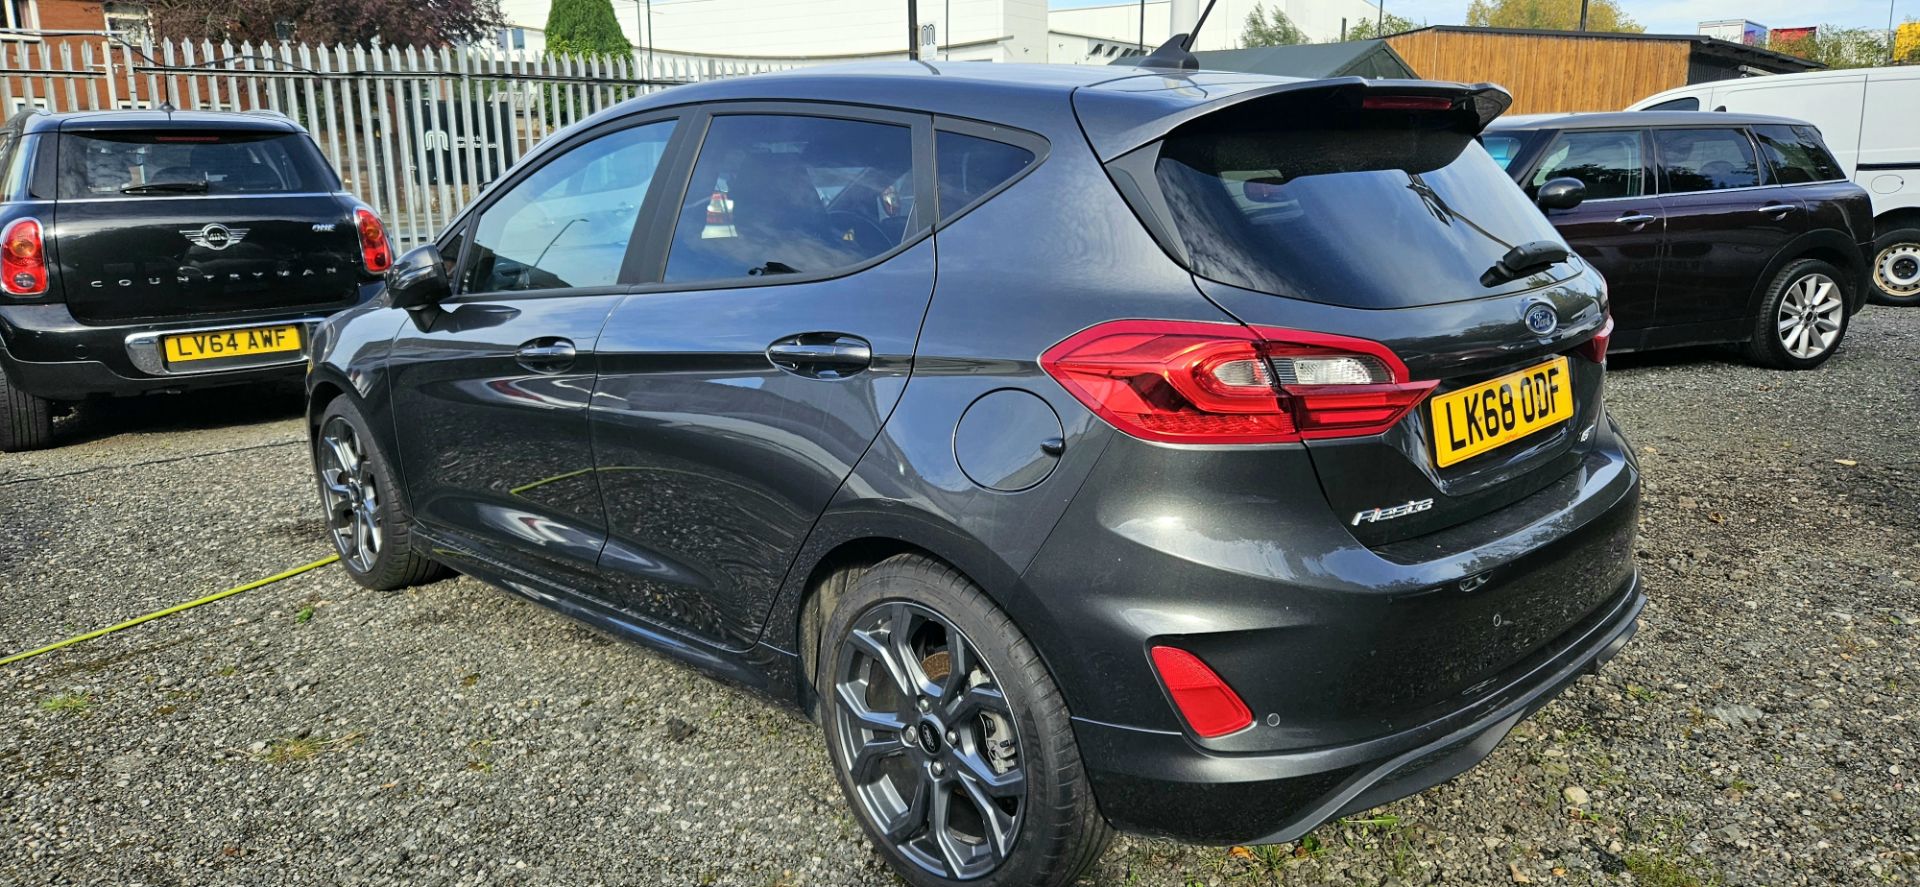 2019 FORD FIESTA ST LINE 1 LITRE AUTOMATIC - Image 3 of 8